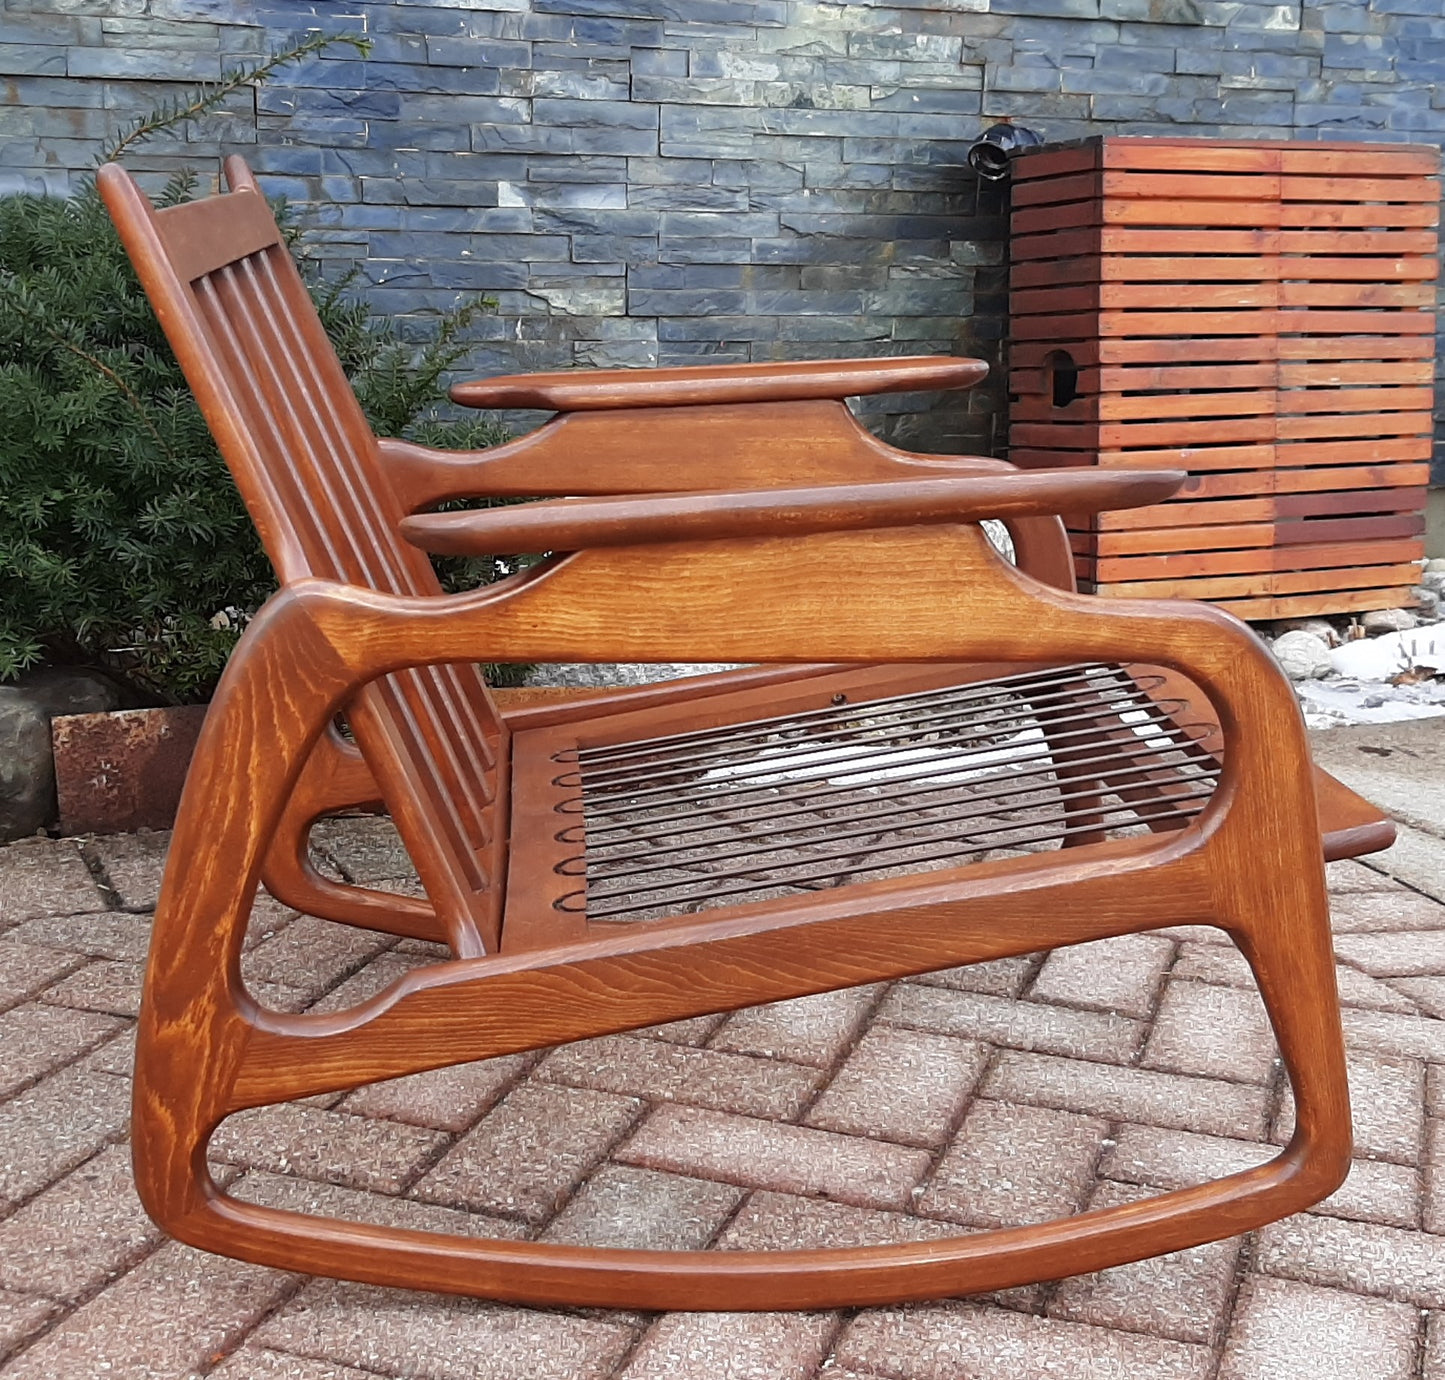 REFINISHED MCM Rocking Chair by Adrian Pearsall, includes NEW CUSHIONS, Perfect